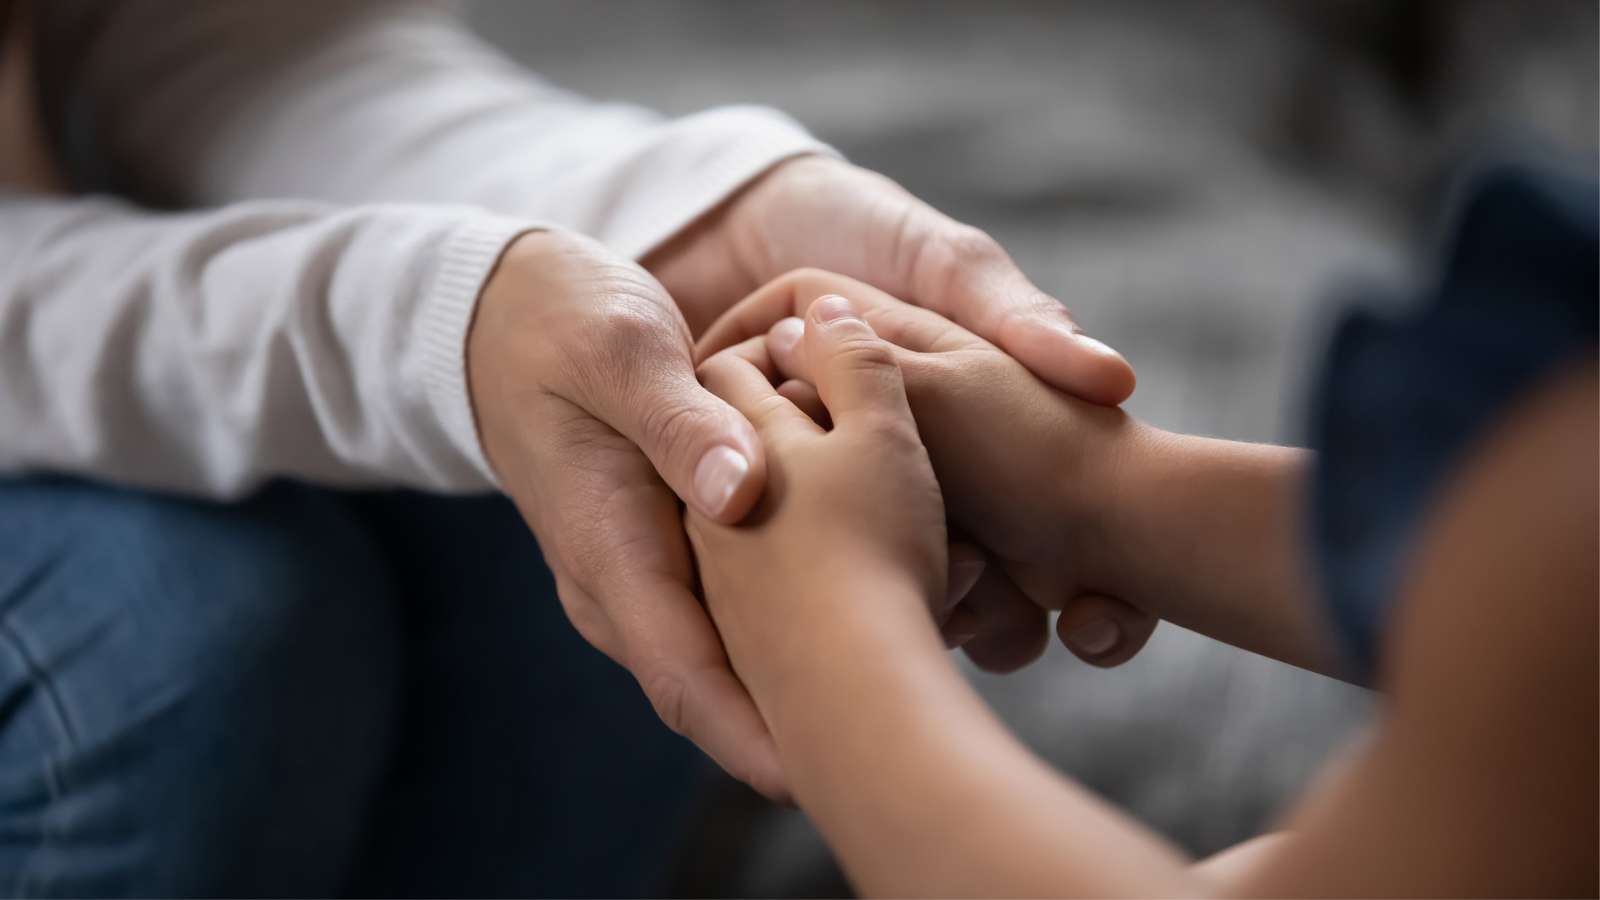 Closeup of adult hands holding child hands in a comforting gesture.